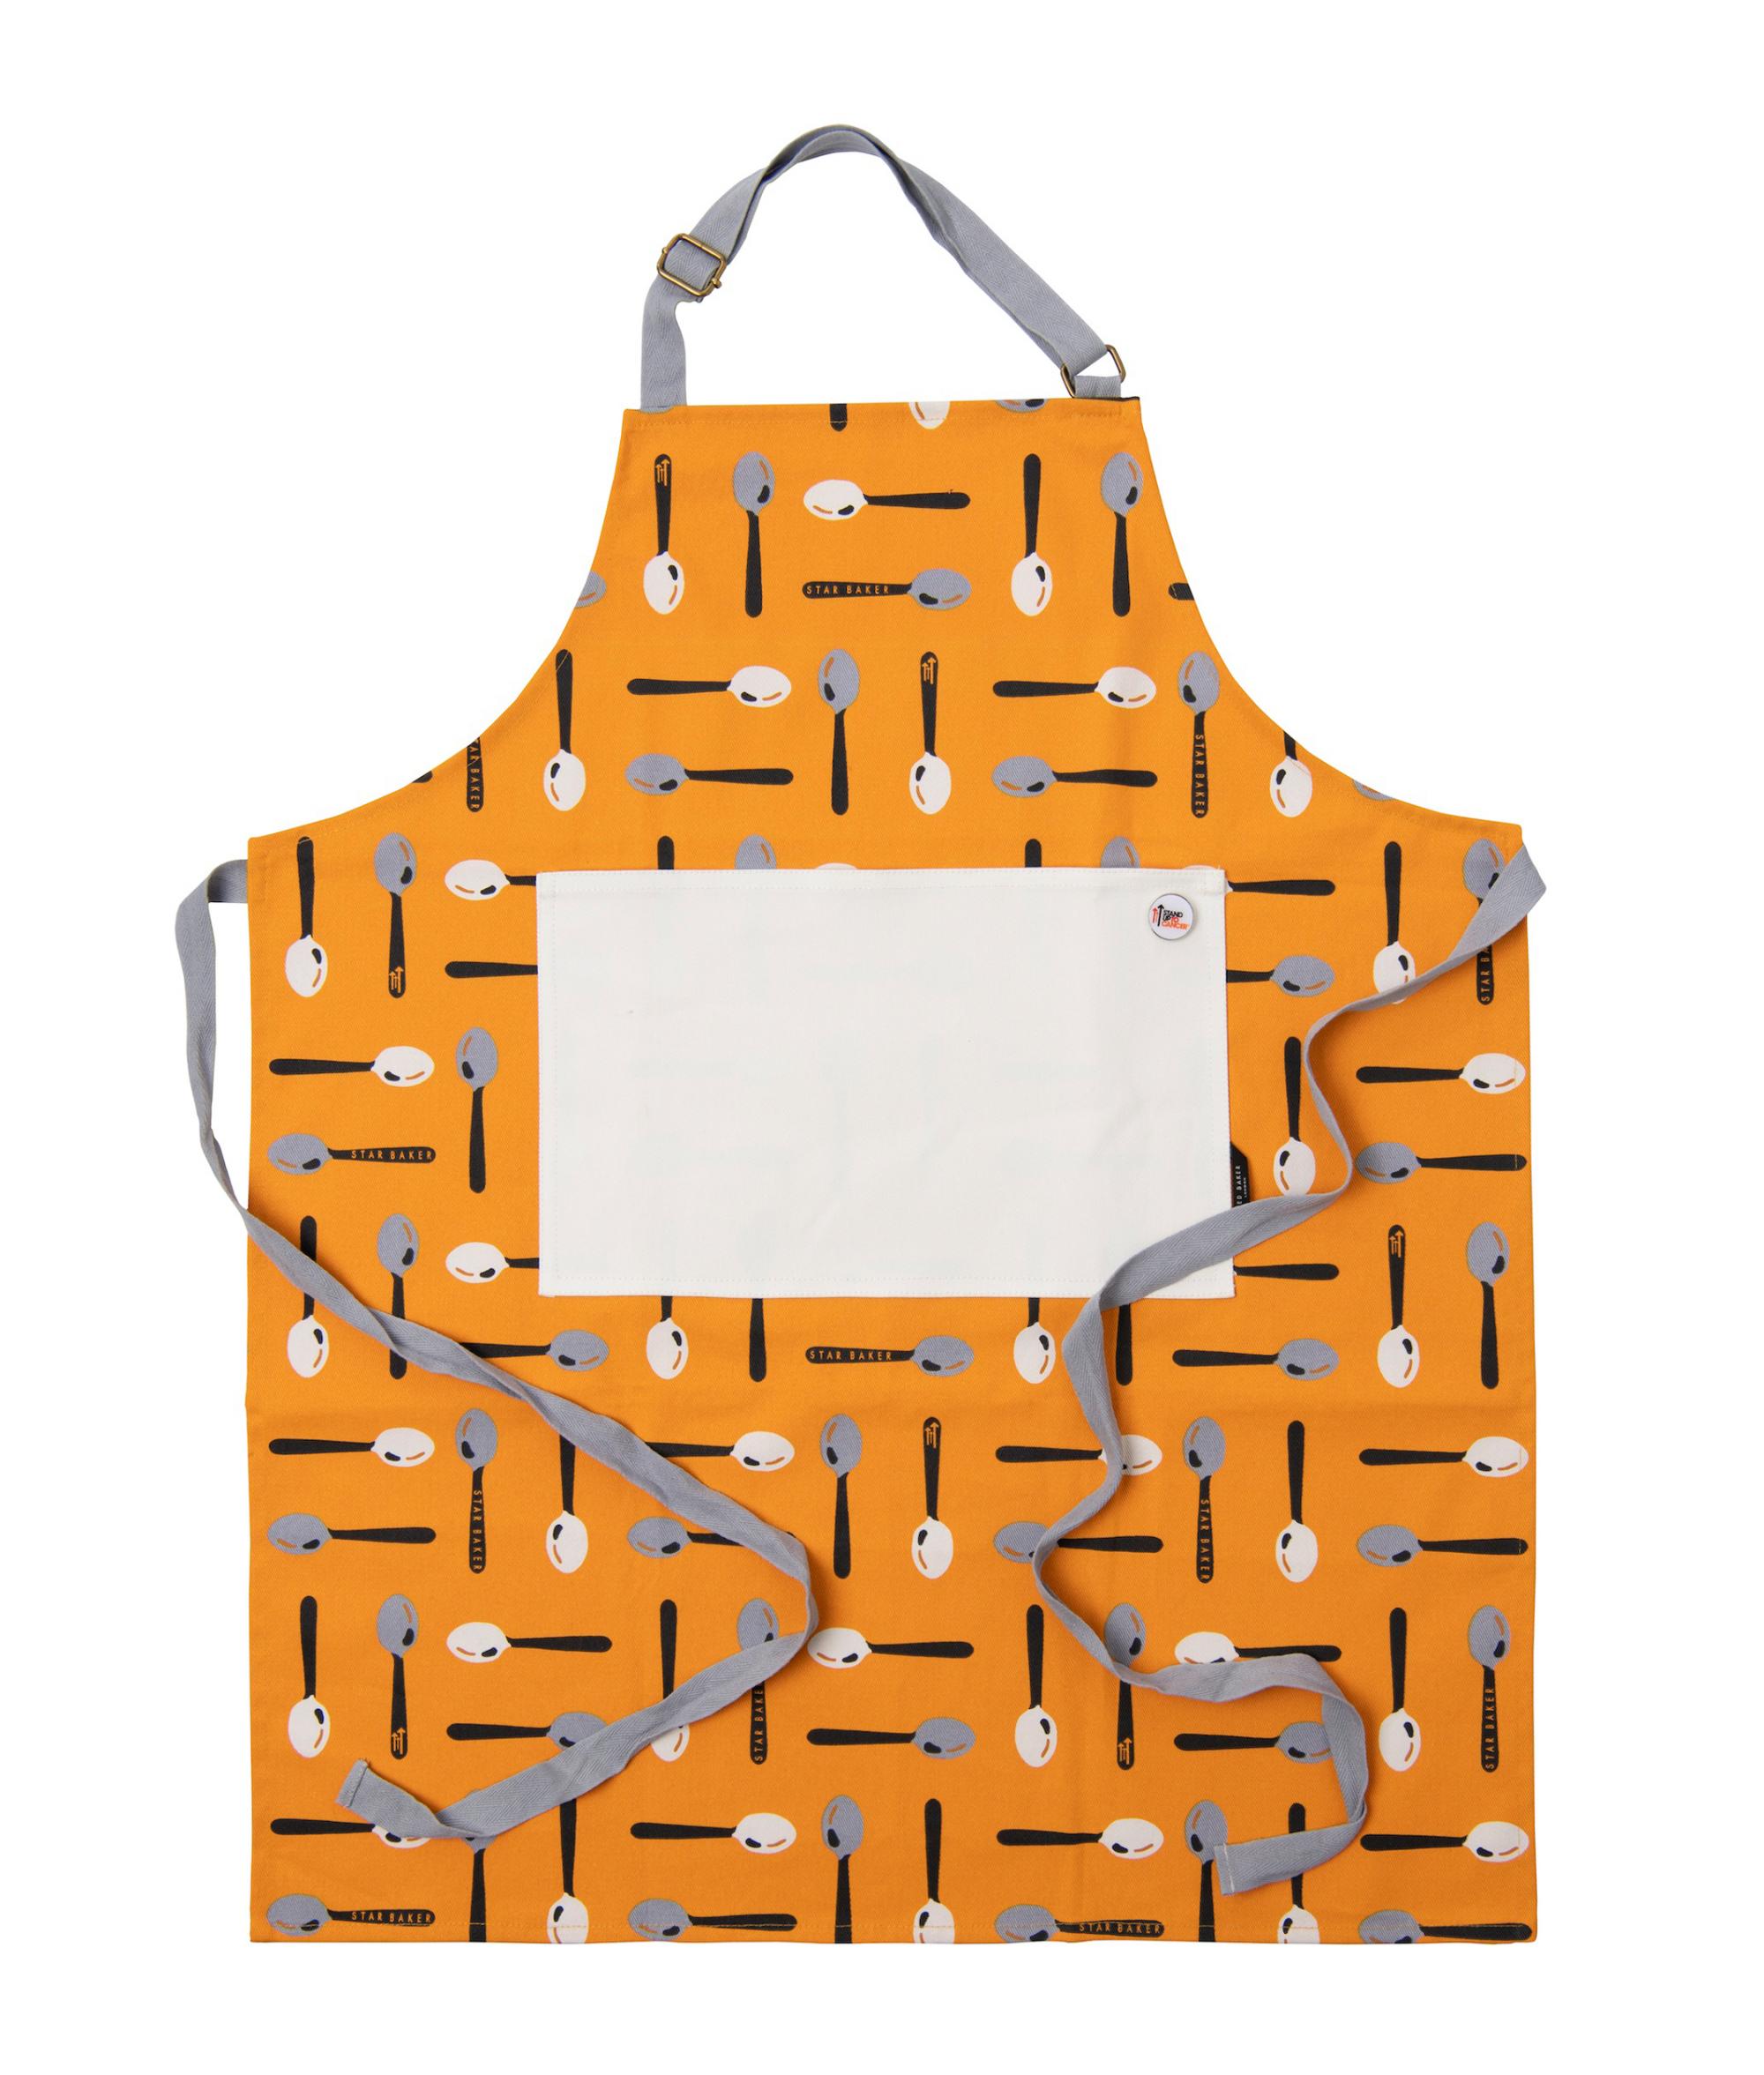 Bake Off Star Baker Apron by Ted Baker | Stand Up To Cancer